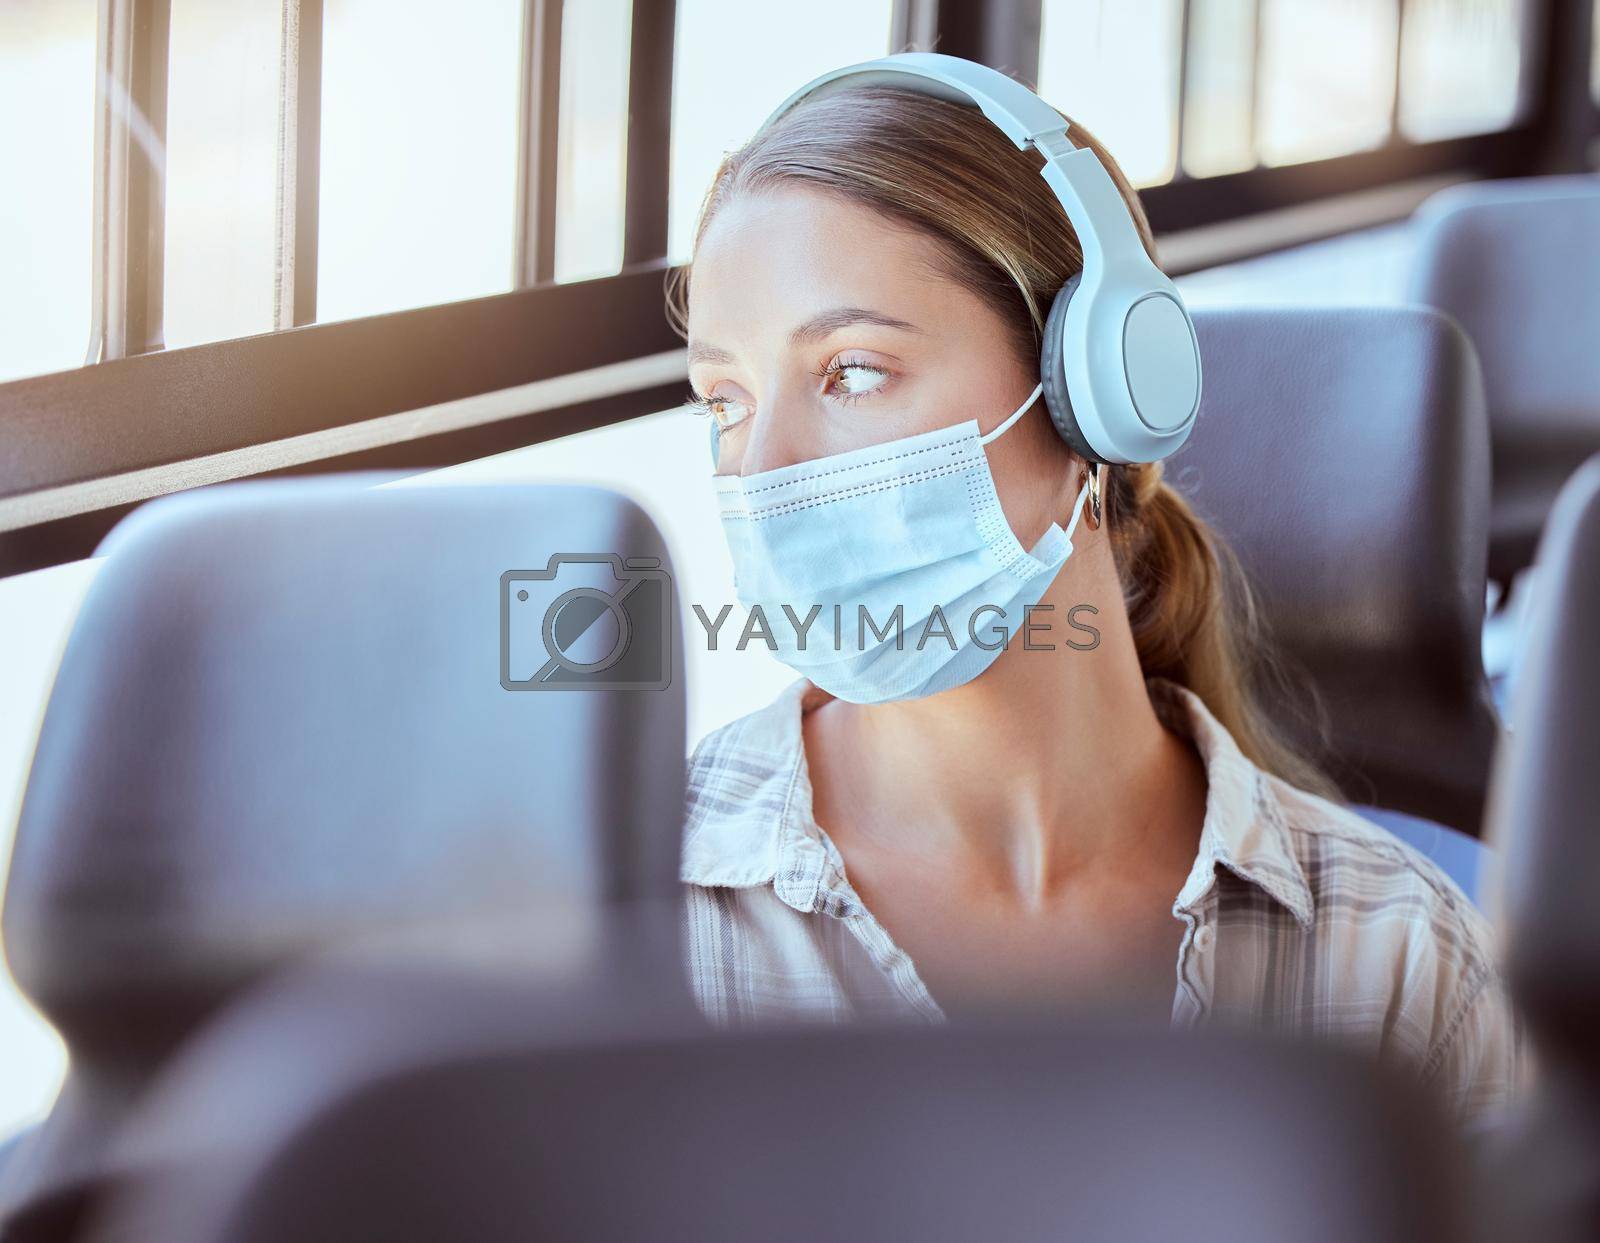 Covid face mask, headphones and woman on bus sad or worried while listening to podcast or music. Person travel in city train transportation with 5g and audio live streaming corona virus news update.